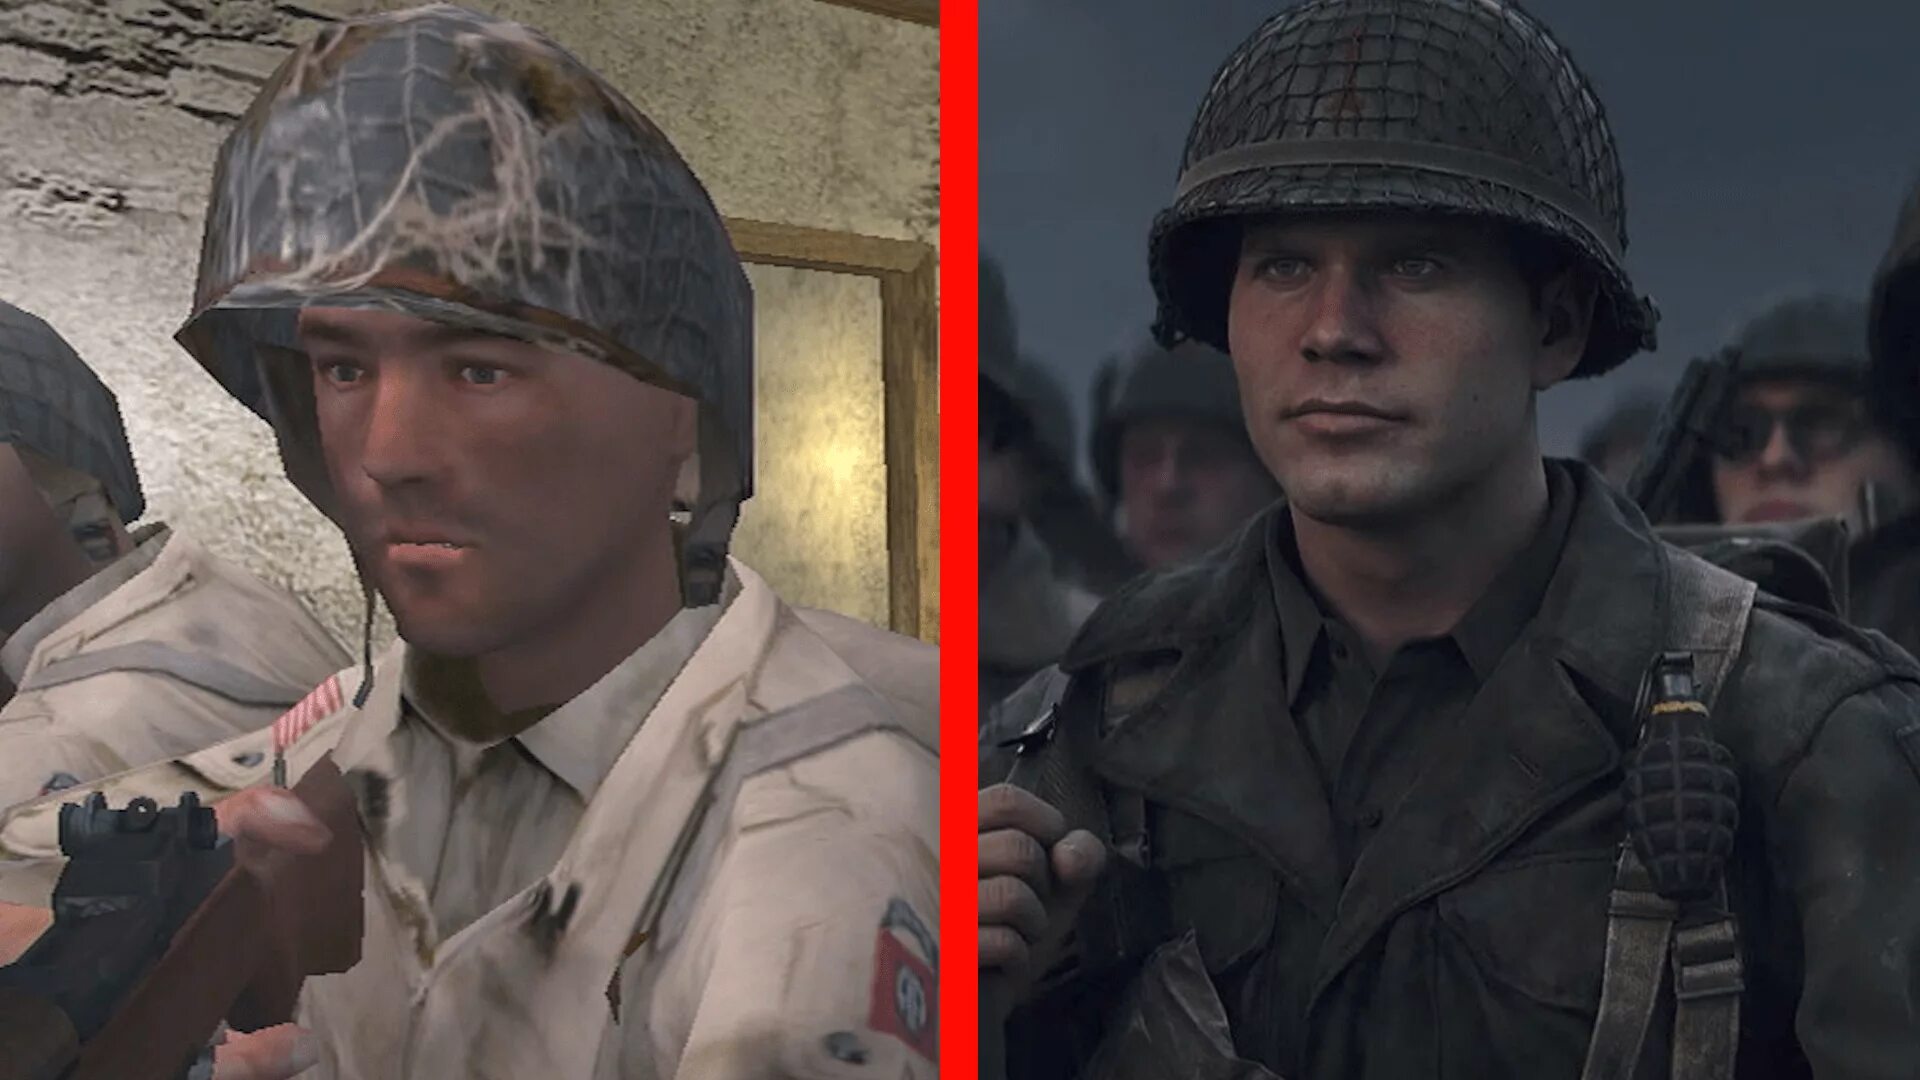 Call of duty ww2 на русском. Call of Duty ww2. Айелло из Call of Duty ww2. Call of Duty ww2 русская версия. Call of Duty WWII 2003.